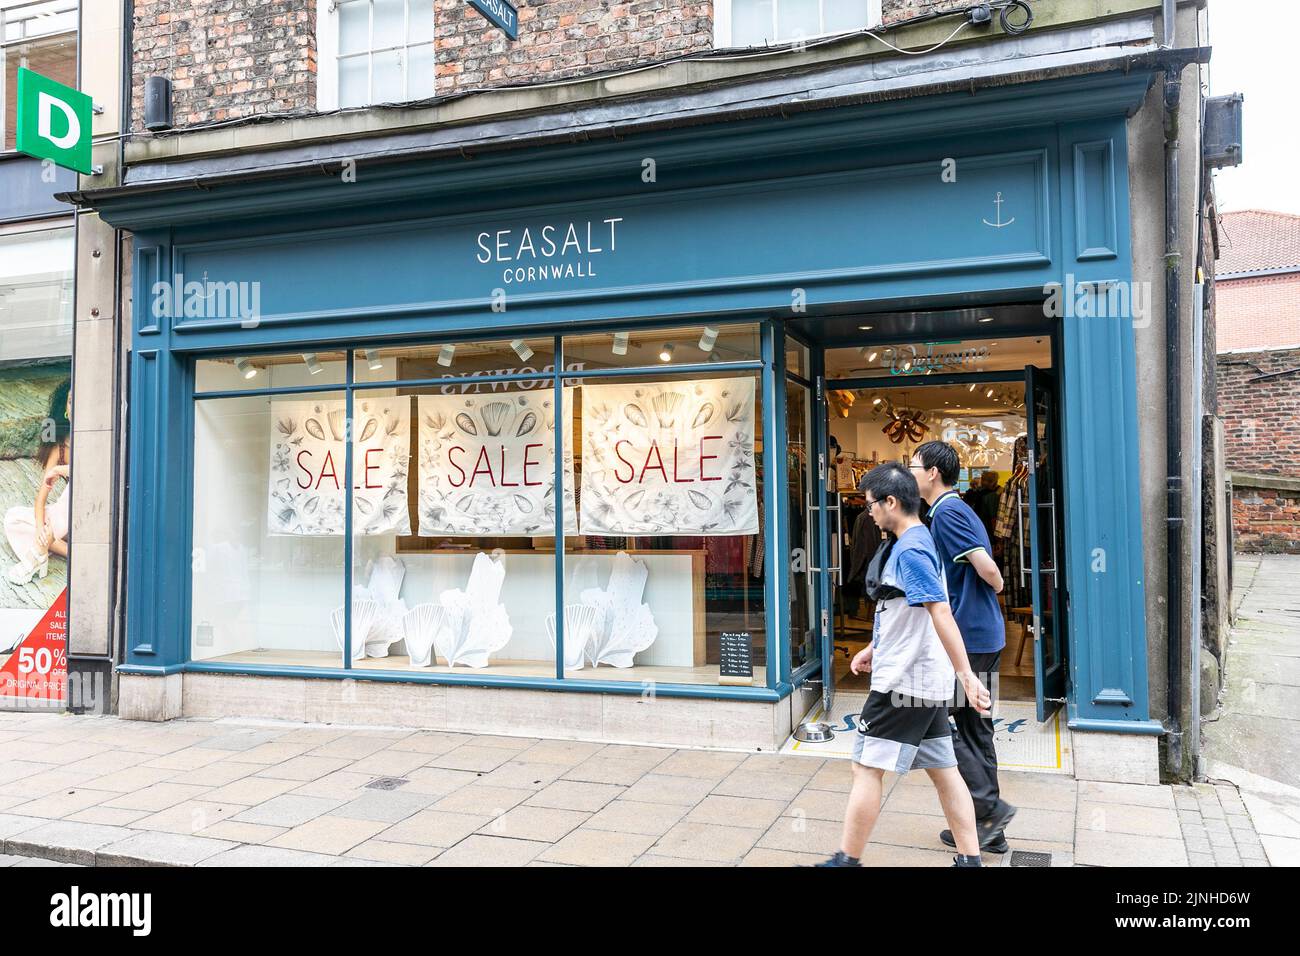 Seasalt Cornwall, store in the city of York promoting advertising summer sale on goods clothing in the shop,Yorkshire,England,July 2022 Stock Photo